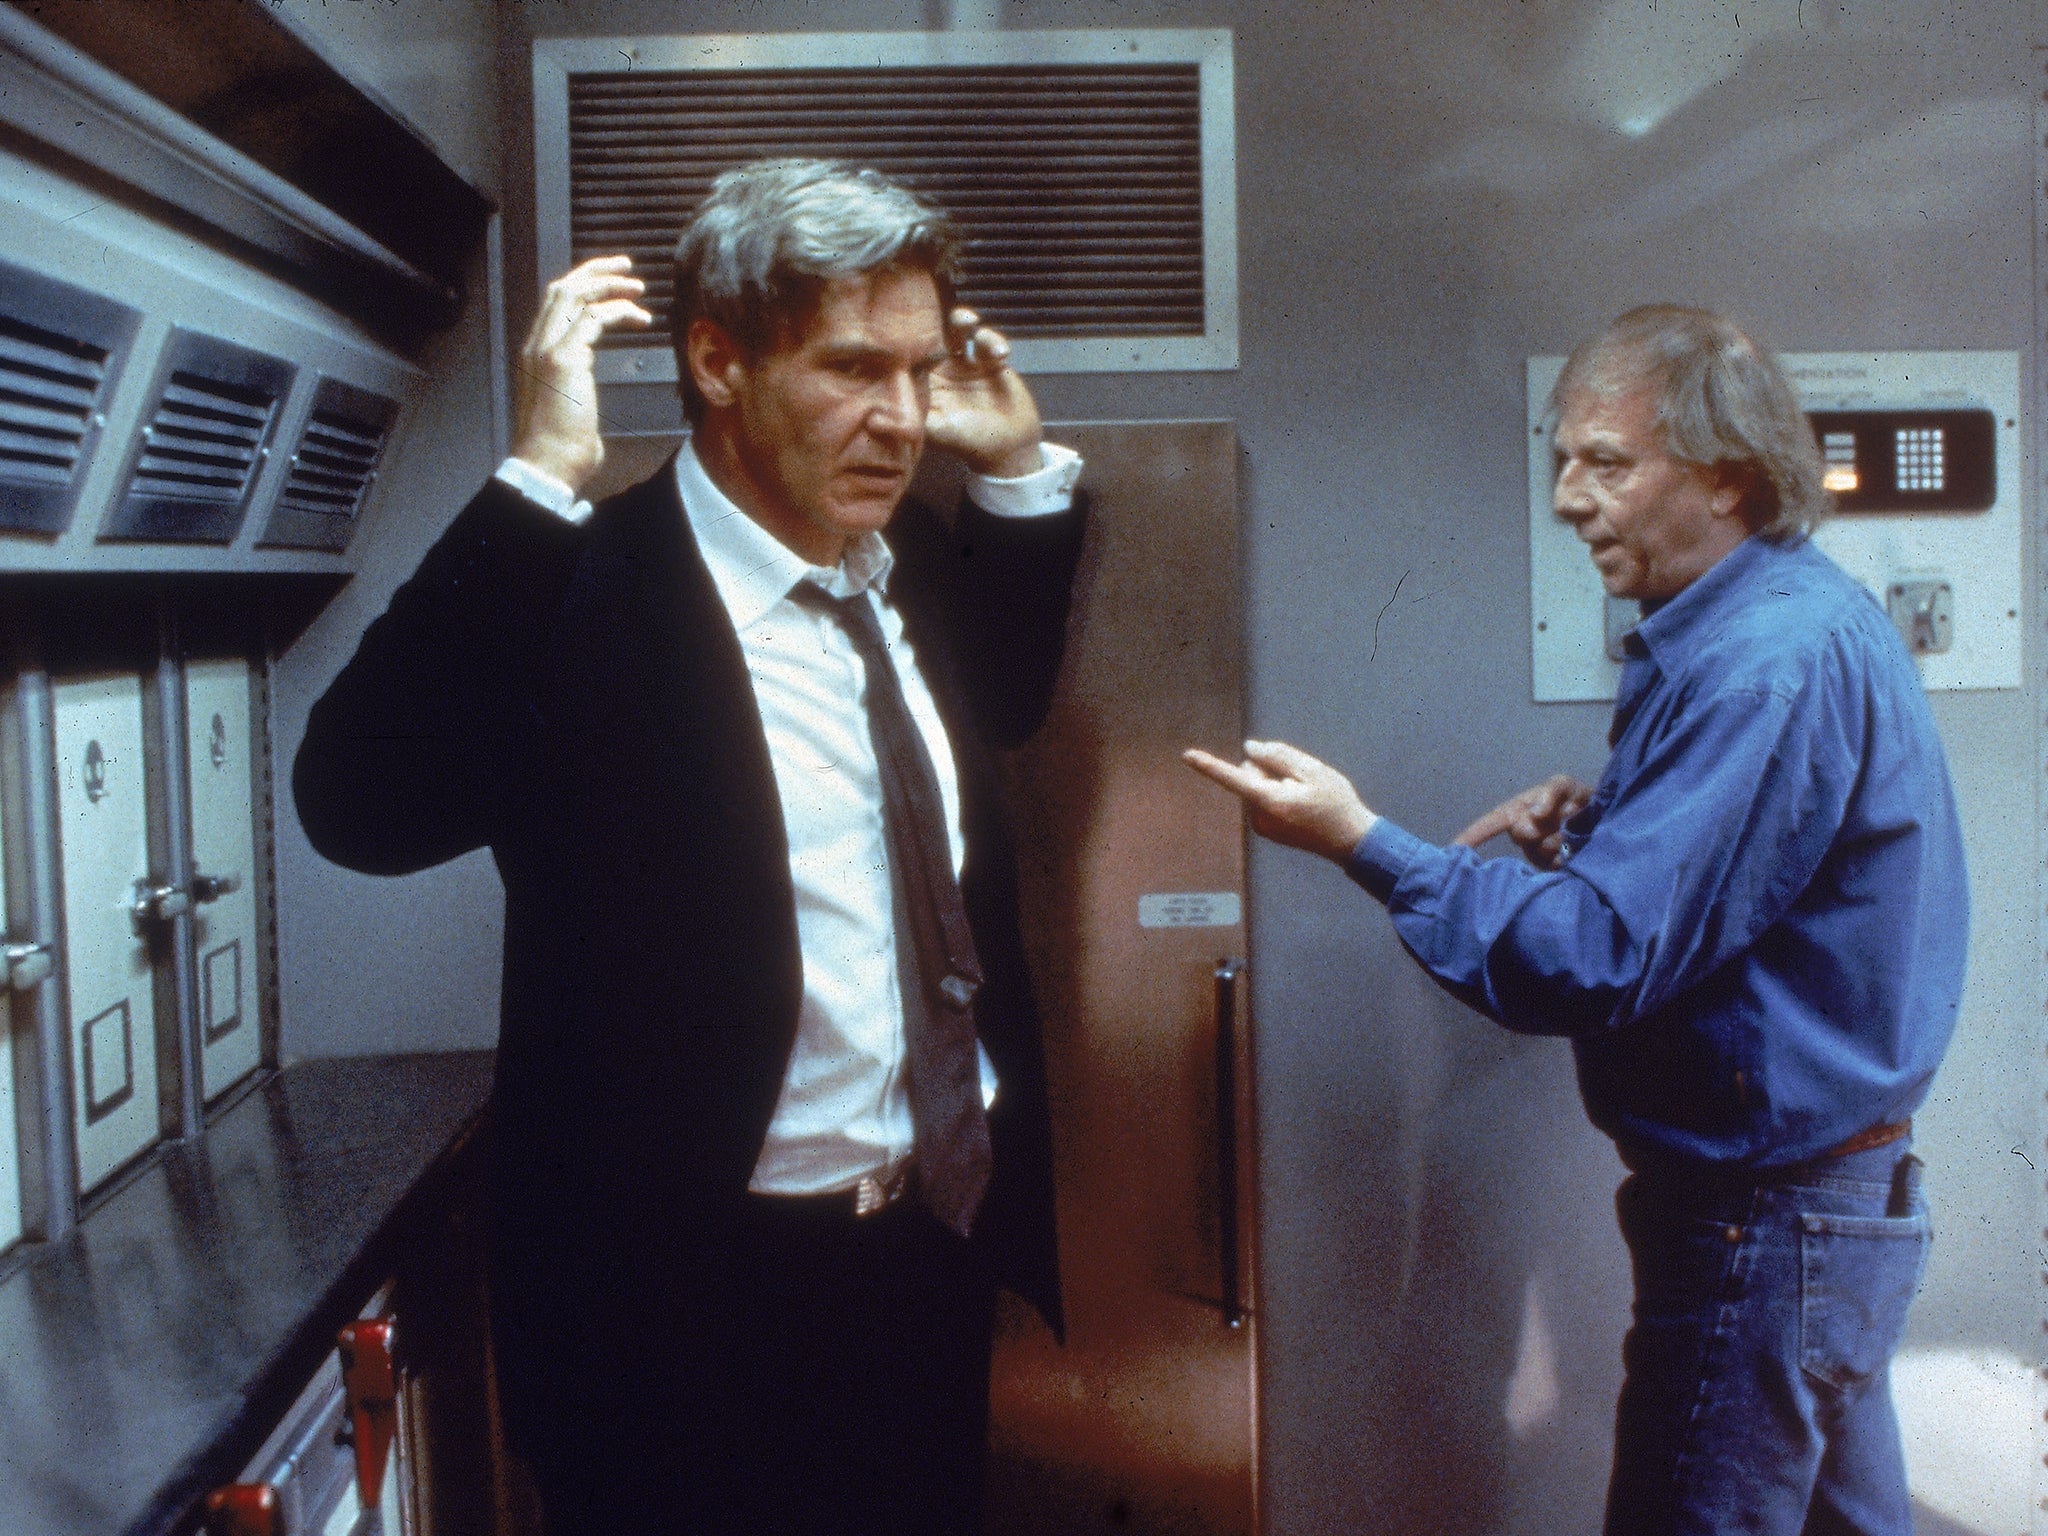 Petersen (right) instructs American actor Harrison Ford on the set of Peterson’s film ‘Air Force One’